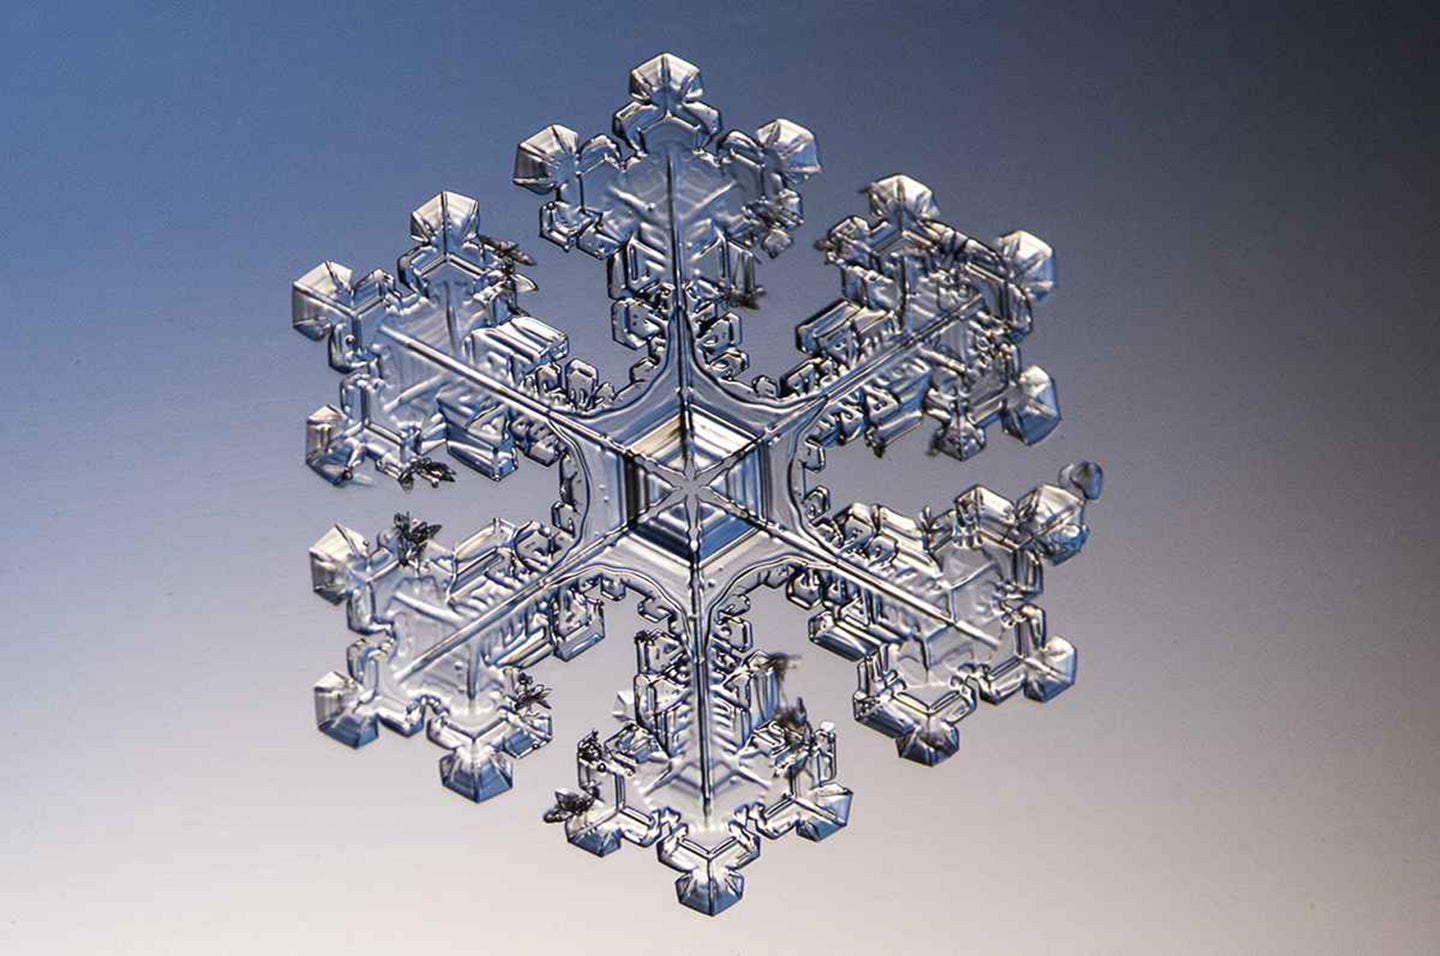 This ice crystal was approximately 1 mm in size. The picture was made at 2:00 pm and the temperature was 14 F. This type of flake is called a stellar dendrite.